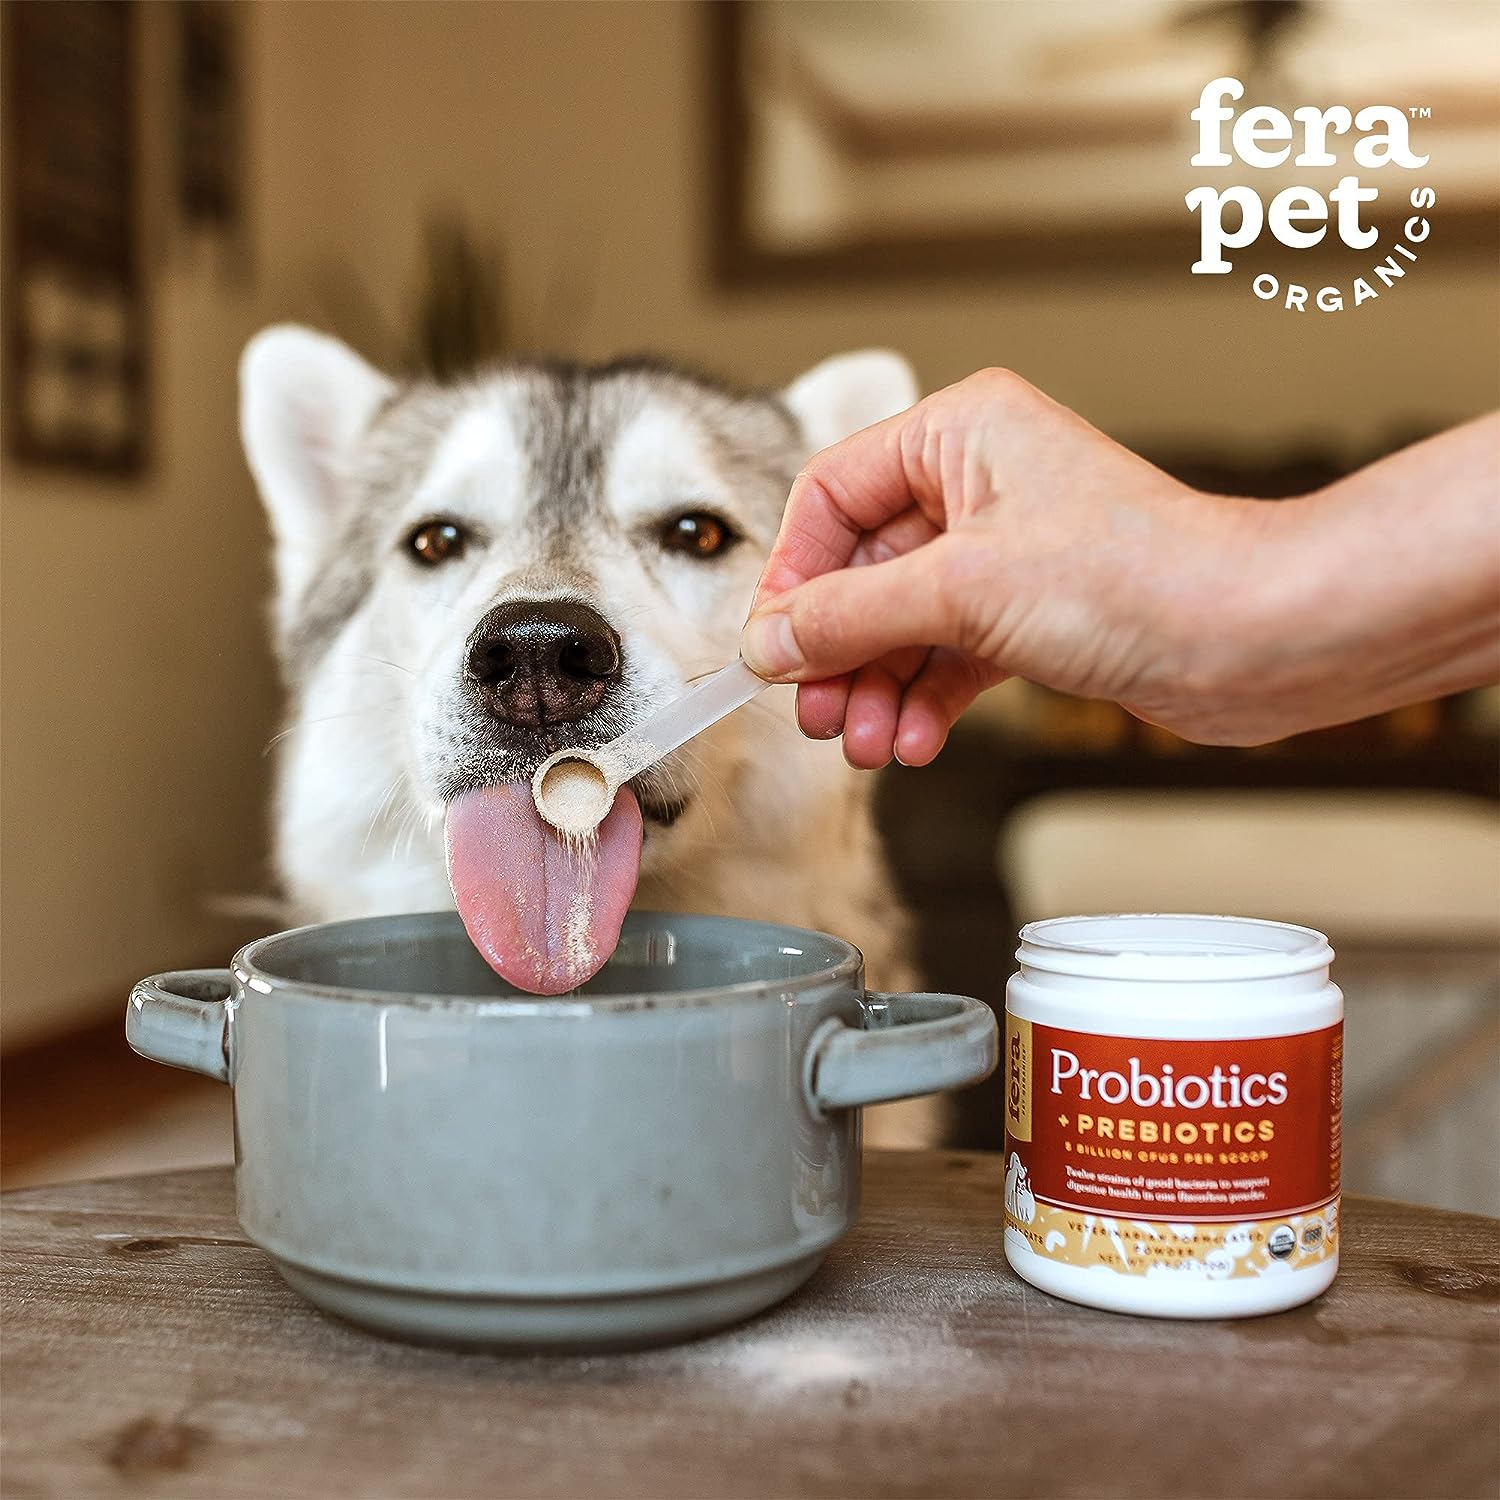 Fera Pets Organic Probiotics for Dogs & Cats - Cat & Dog Probiotic Supplement with 12 Strains & Prebiotics for Your Pet’s Digestion - 60 Scoops? : Pet Supplies